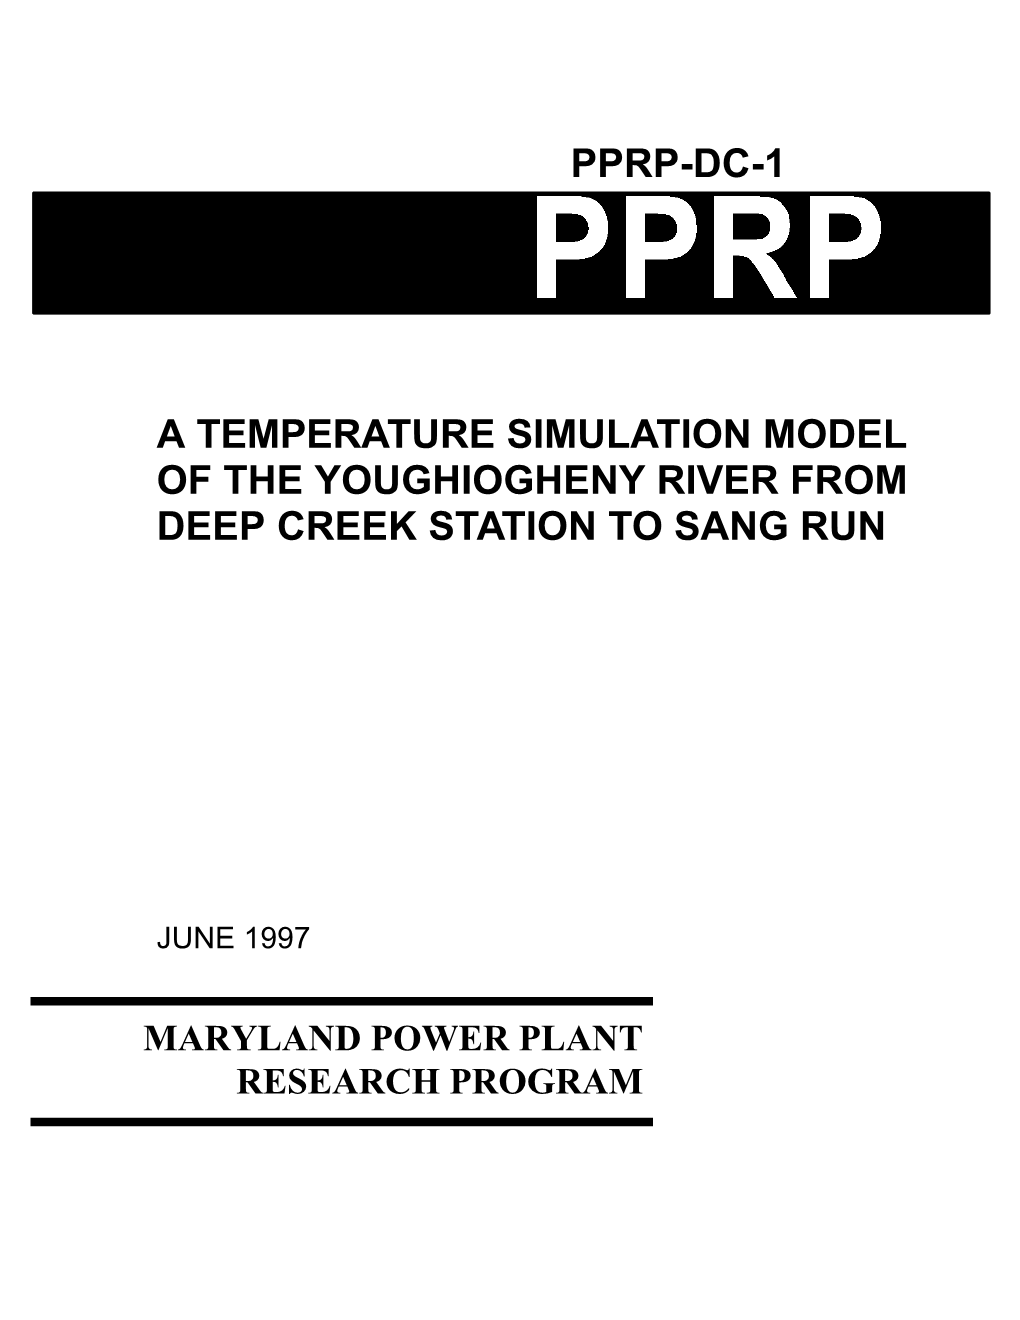 Pprp-Dc-1 a Temperature Simulation Model of The